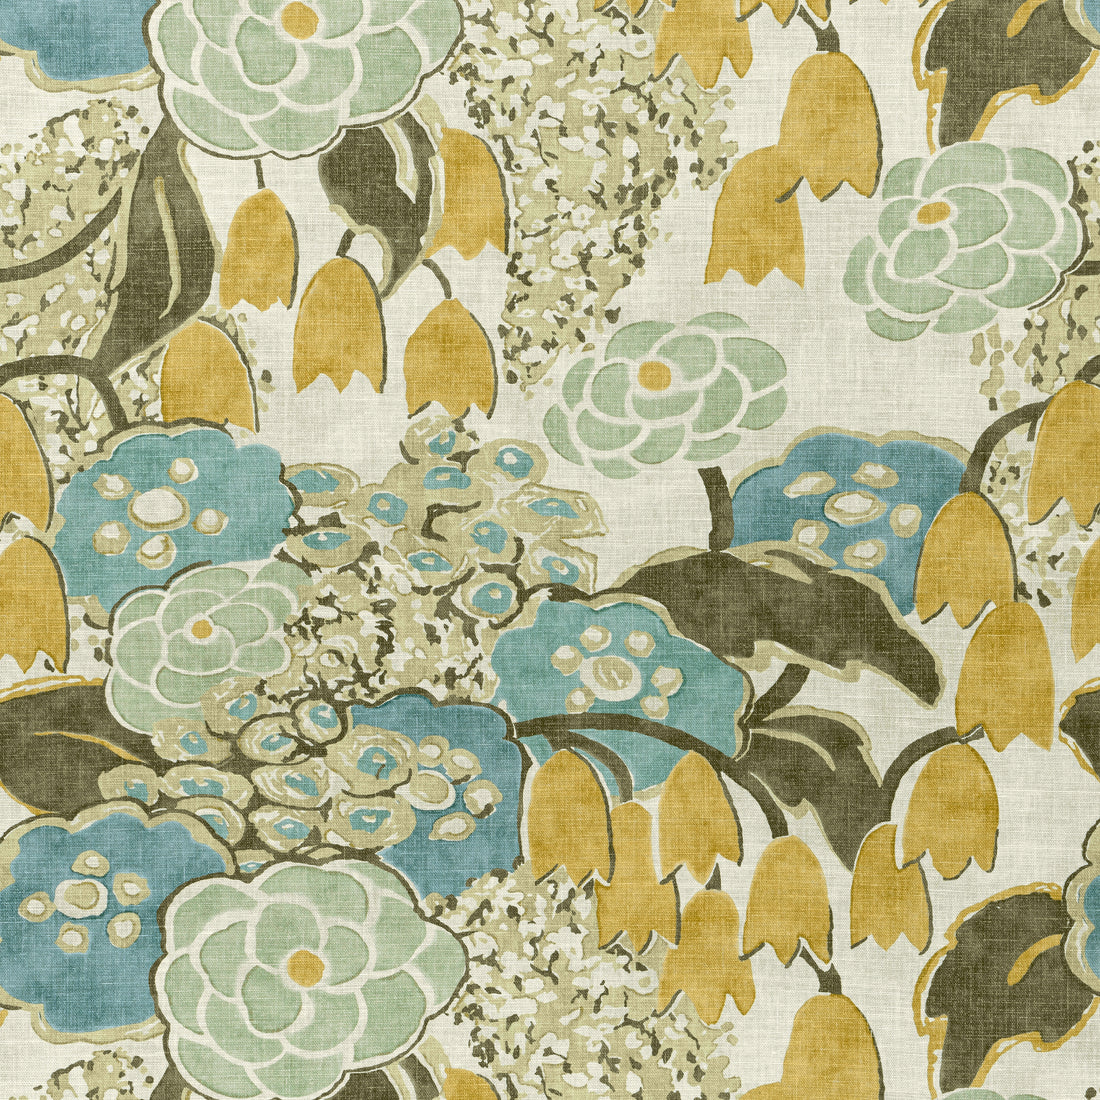 Laura fabric in sage and gold color - pattern number AF23102 - by Anna French in the Willow Tree collection